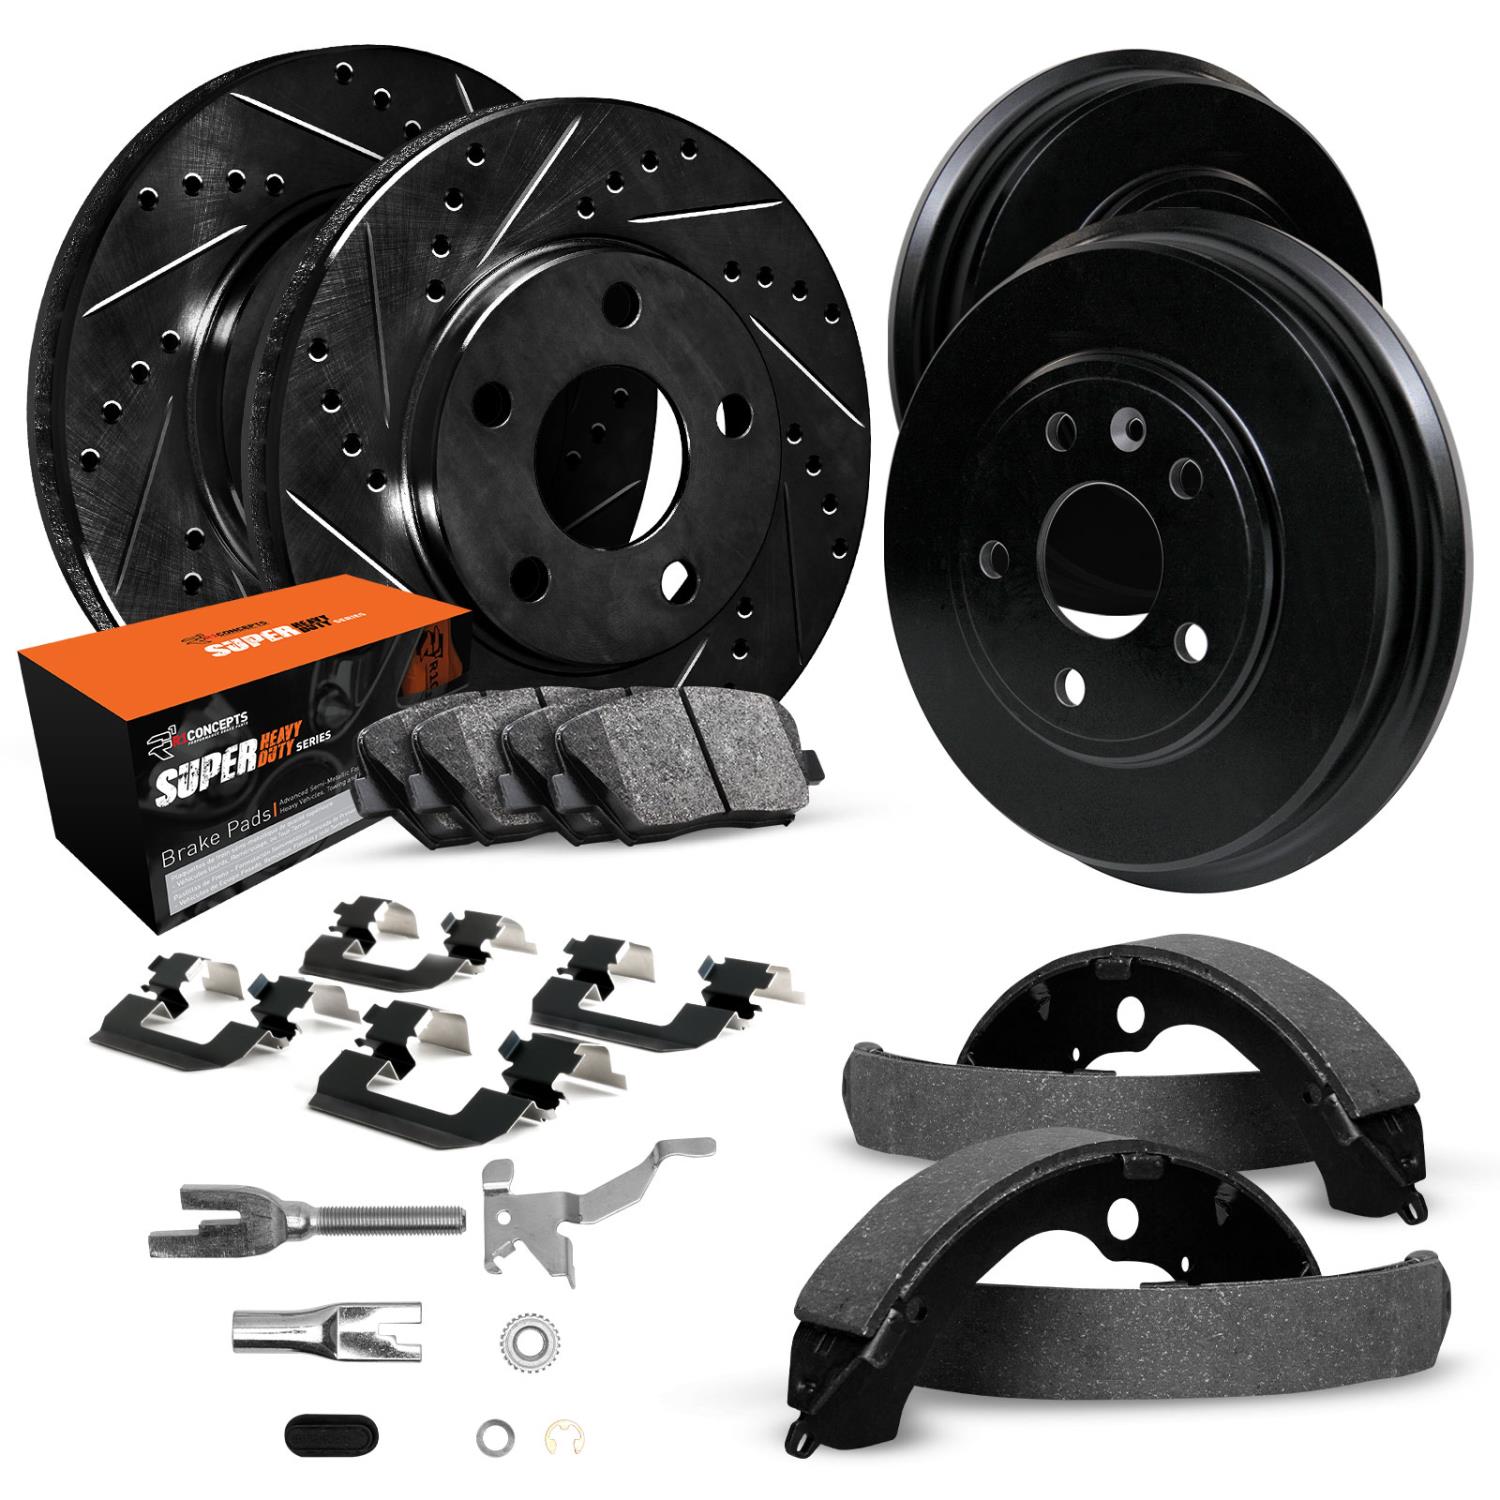 E-Line Drilled/Slotted Black Rotor & Drum Set w/Super-Duty Pads, Shoes, Hardware/Adjusters, 1991-1992 GM